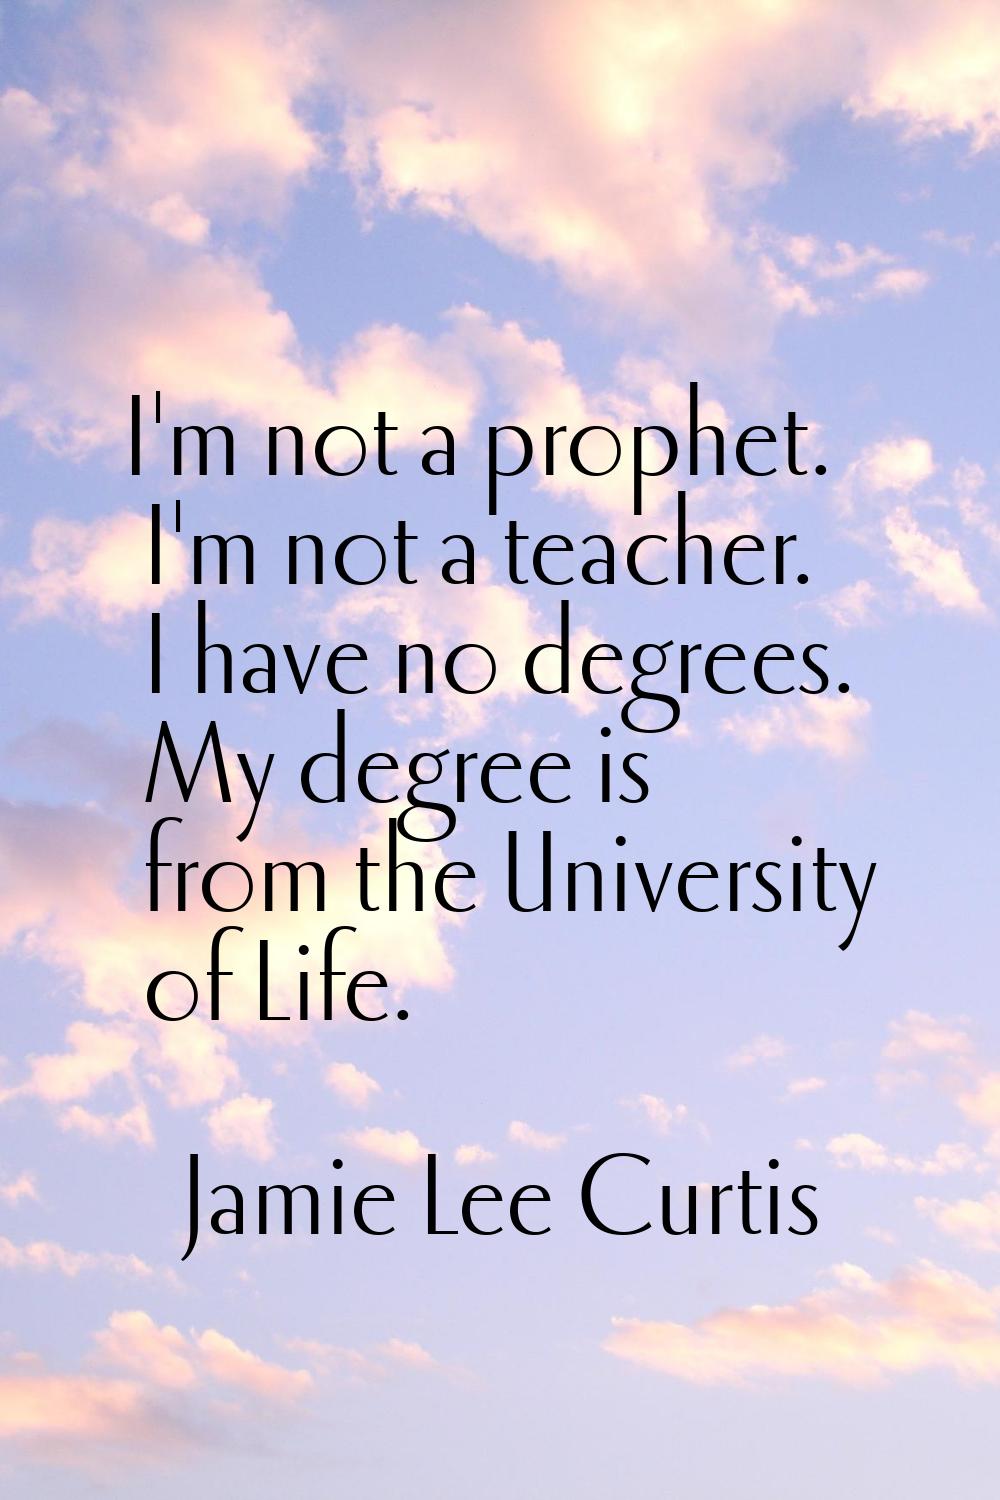 I'm not a prophet. I'm not a teacher. I have no degrees. My degree is from the University of Life.